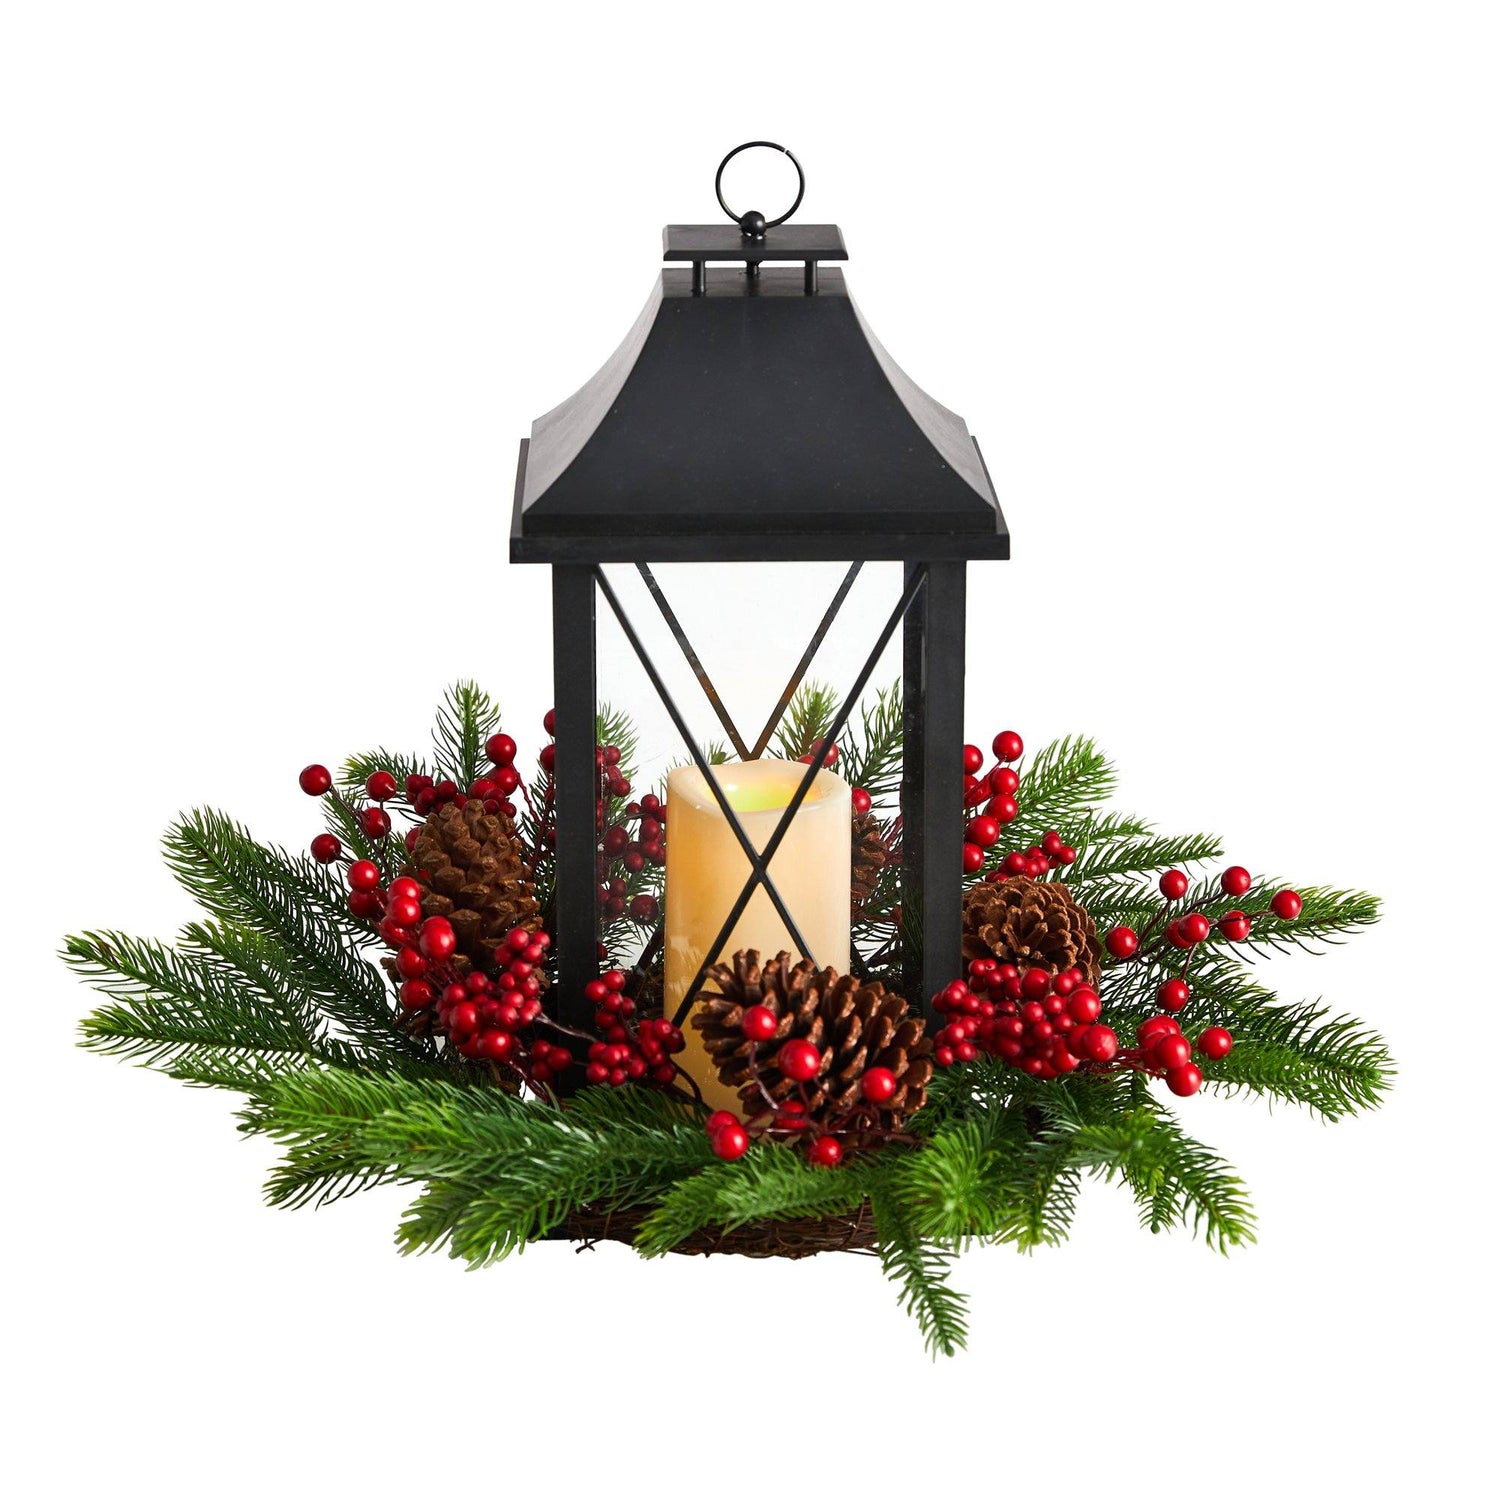 16" Holiday Berries, Pinecones and Greenery with Lantern and Included LED Candle Table Arrangement"